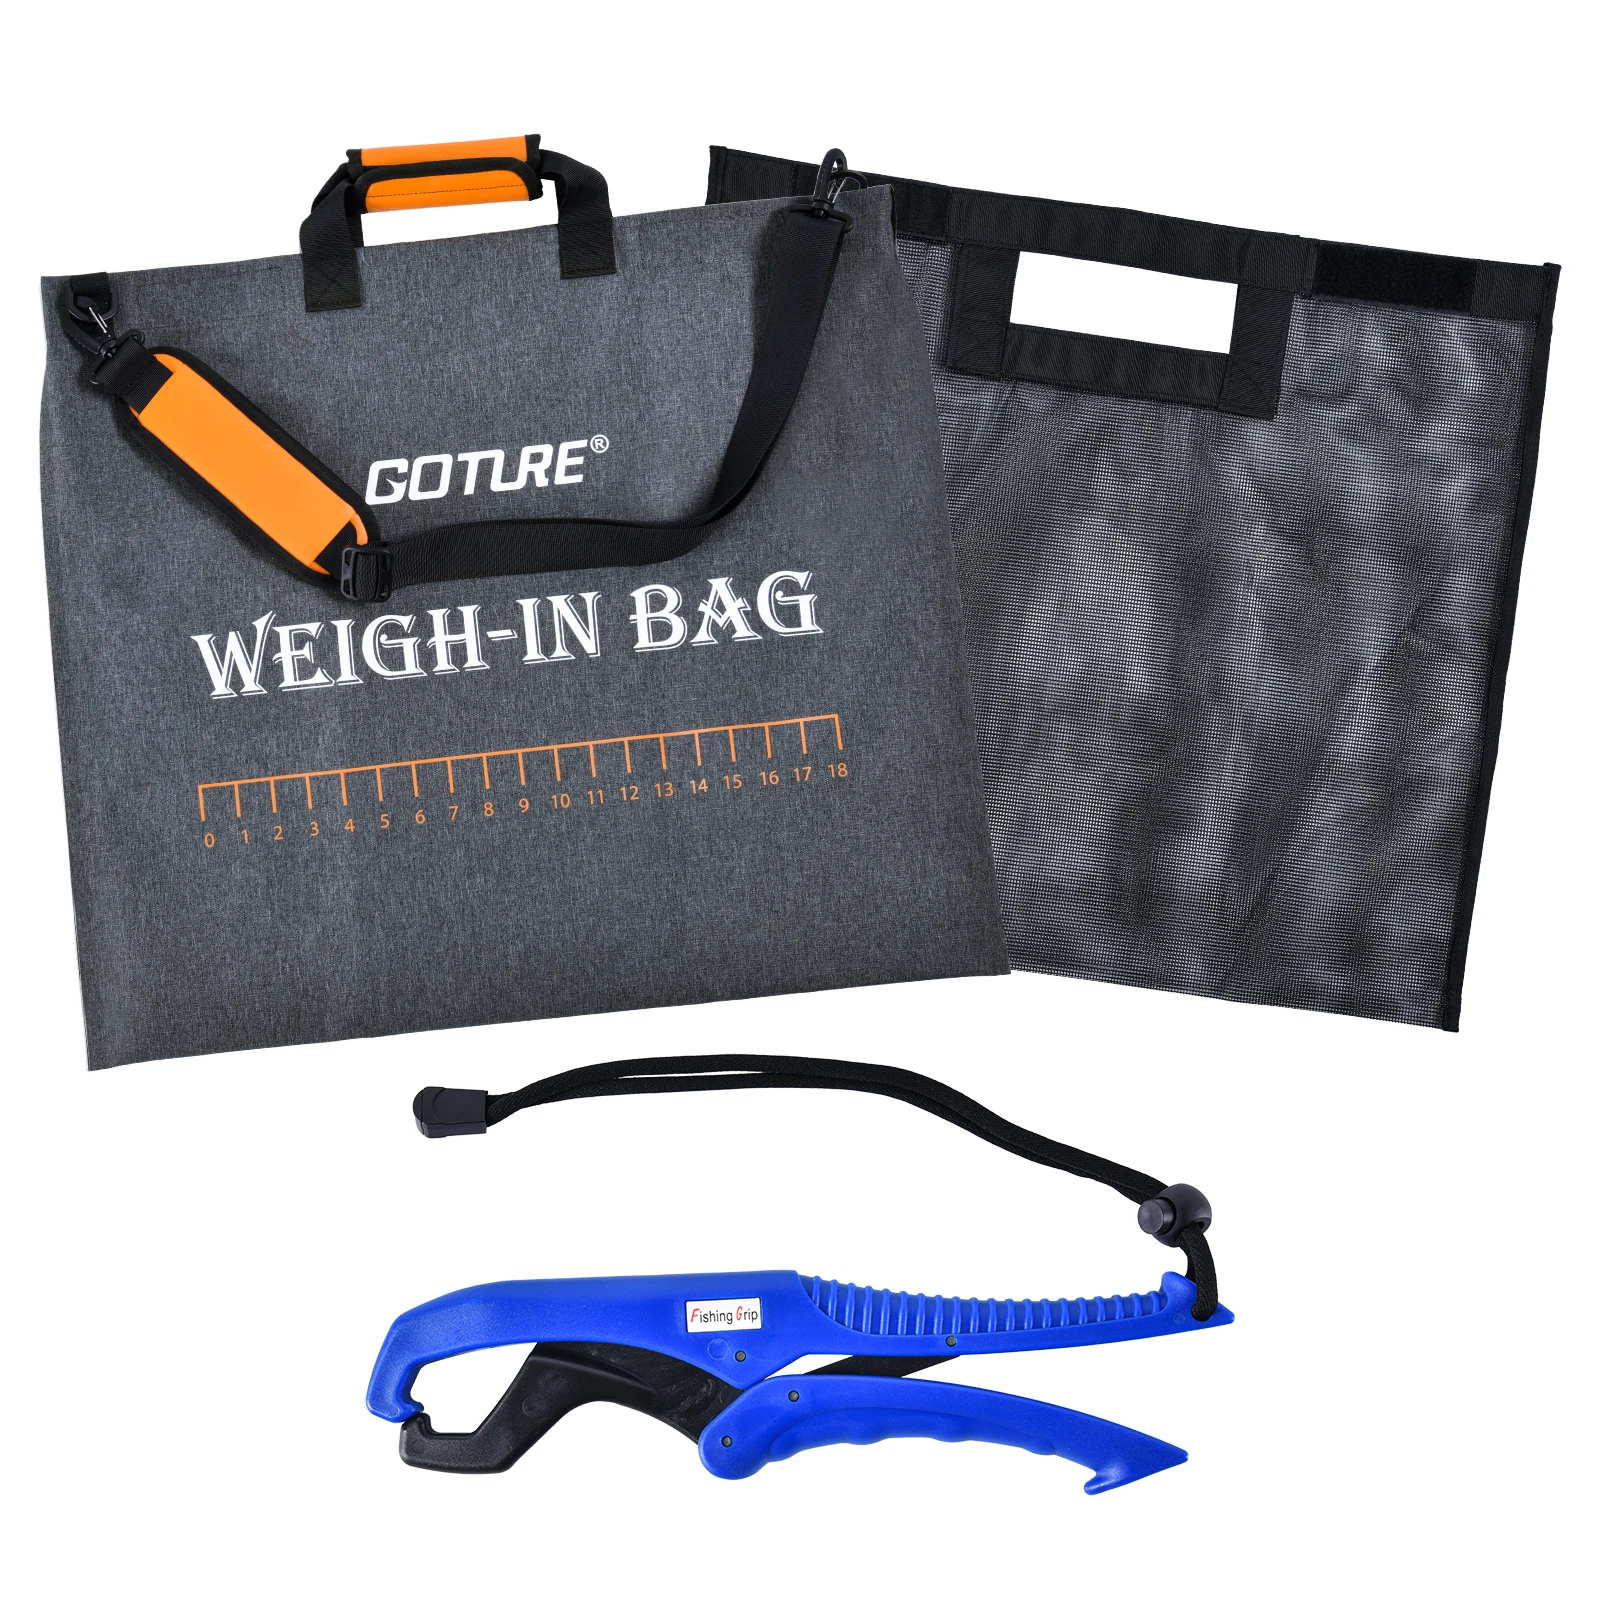 https://ae01.alicdn.com/kf/S2423474db78640d29bf86b81e239f0248/Goture-Weigh-in-Fish-Bag-Removable-Inner-Mesh-Tournament-Fish-Bags-with-Fish-Ruler-Heavy-Duty.jpg